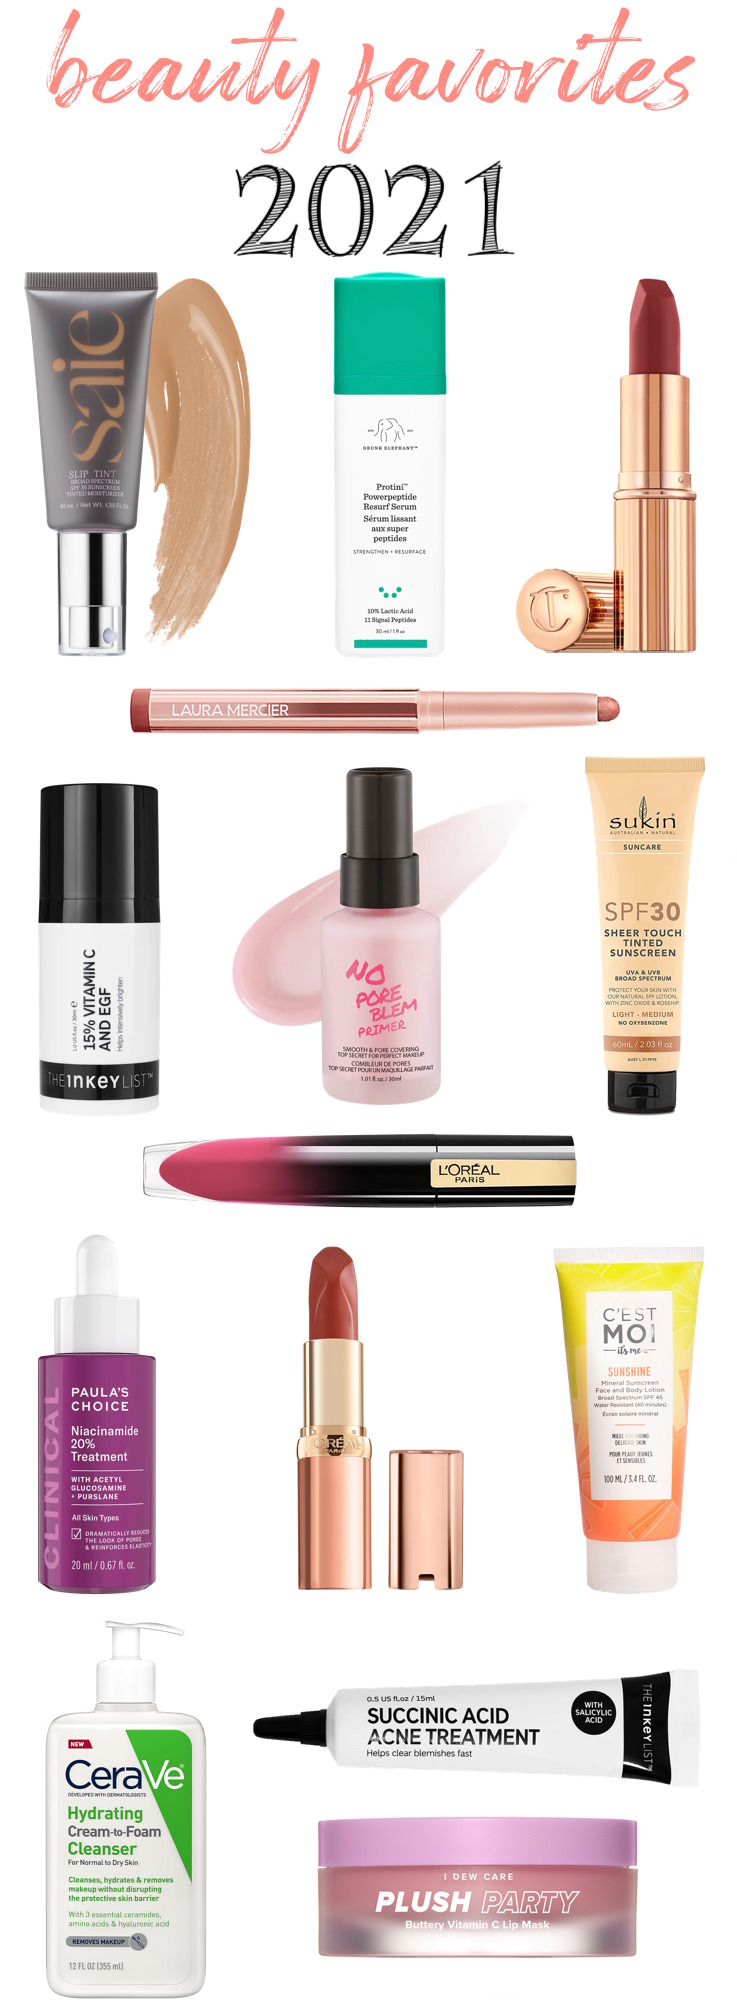 Best beauty products 2021 roundup! My top 16 skincare and makeup favorites that I loved the most and couldn’t get enough of!